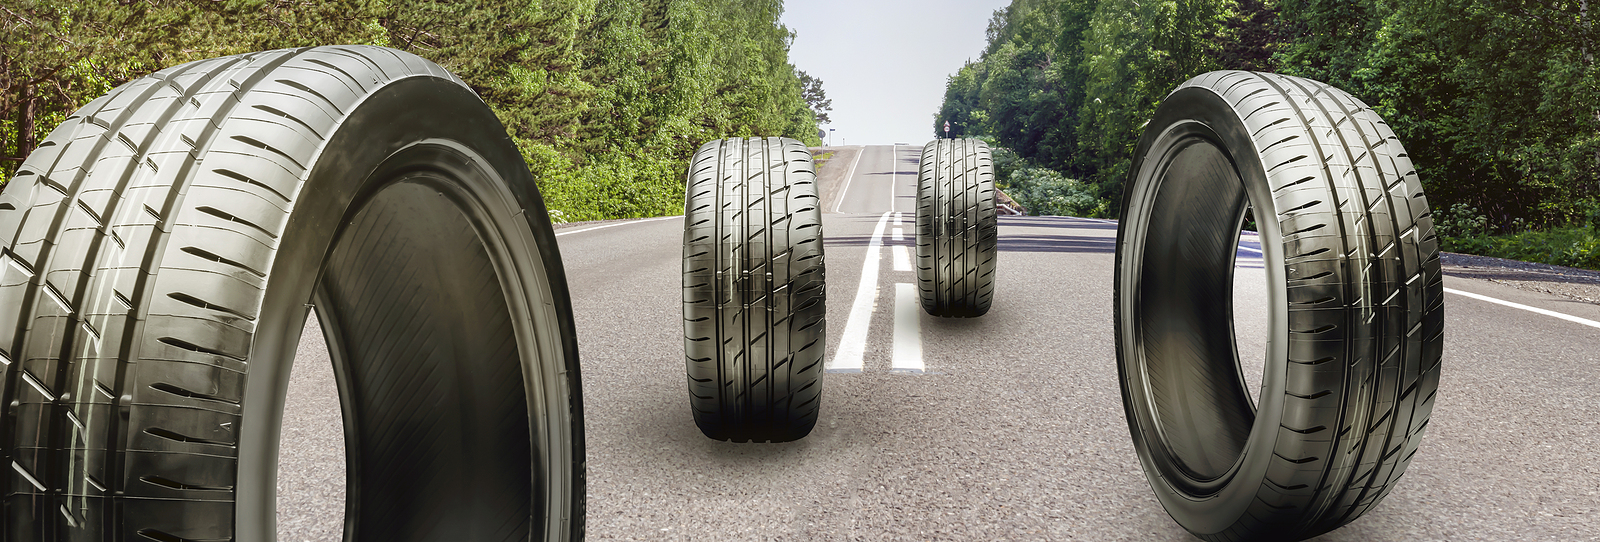 Tips on How to Make Your Tires Last Longer over Time